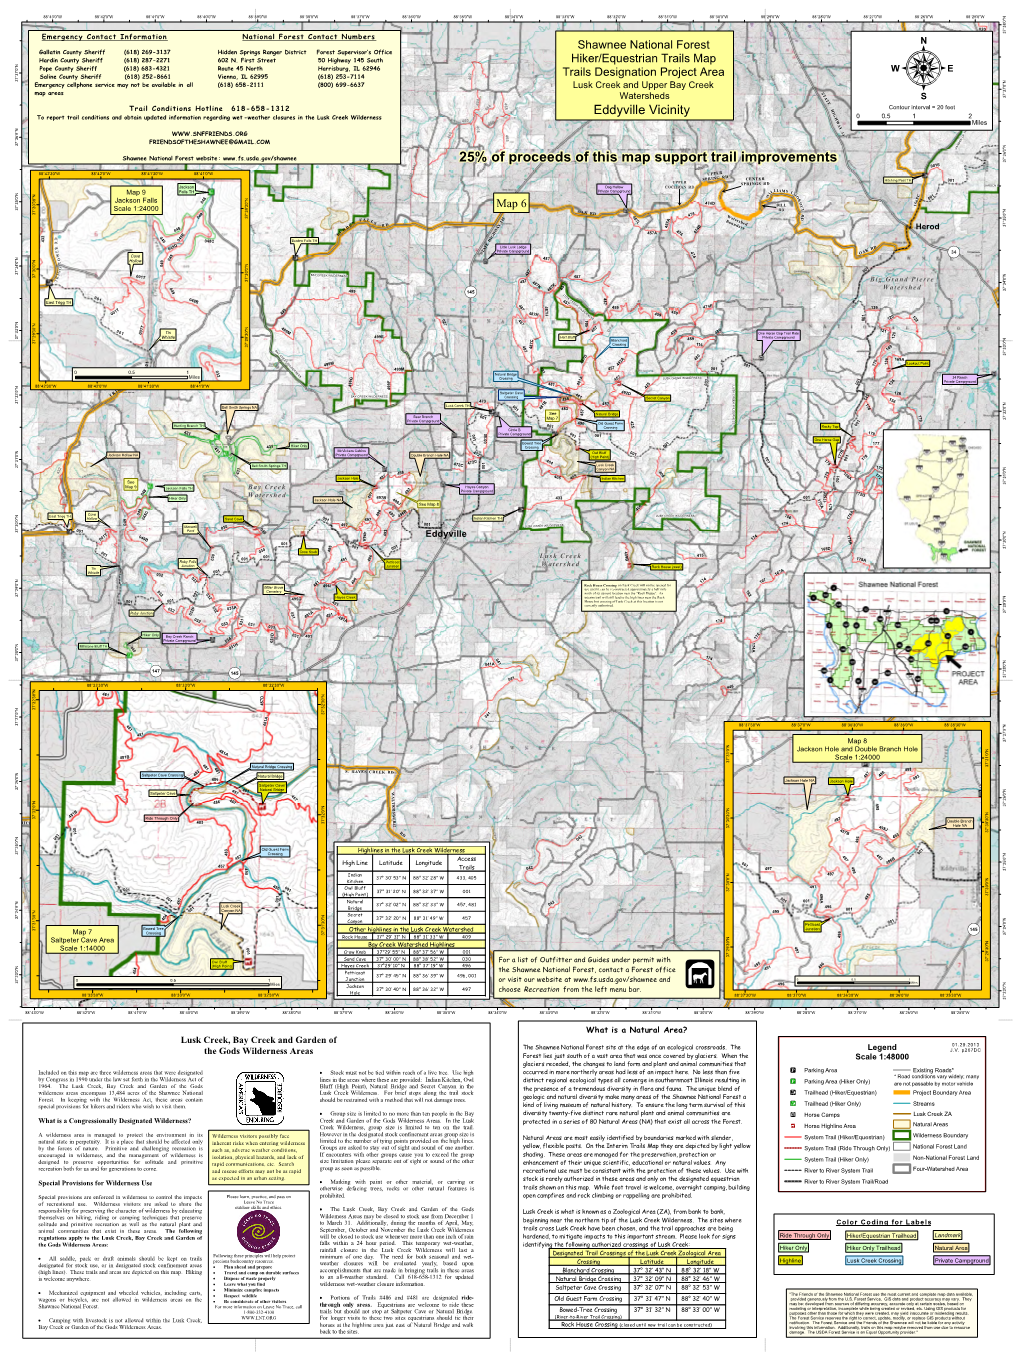 25% of Proceeds of This Map Support Trail Improvements Hiker Only 001E 88°42'30"W 88°42'0"W 88°41'30"W 88°41'0"W UPPER 467 SPRING RD CENTER Hitching Post TH 001 UPPER